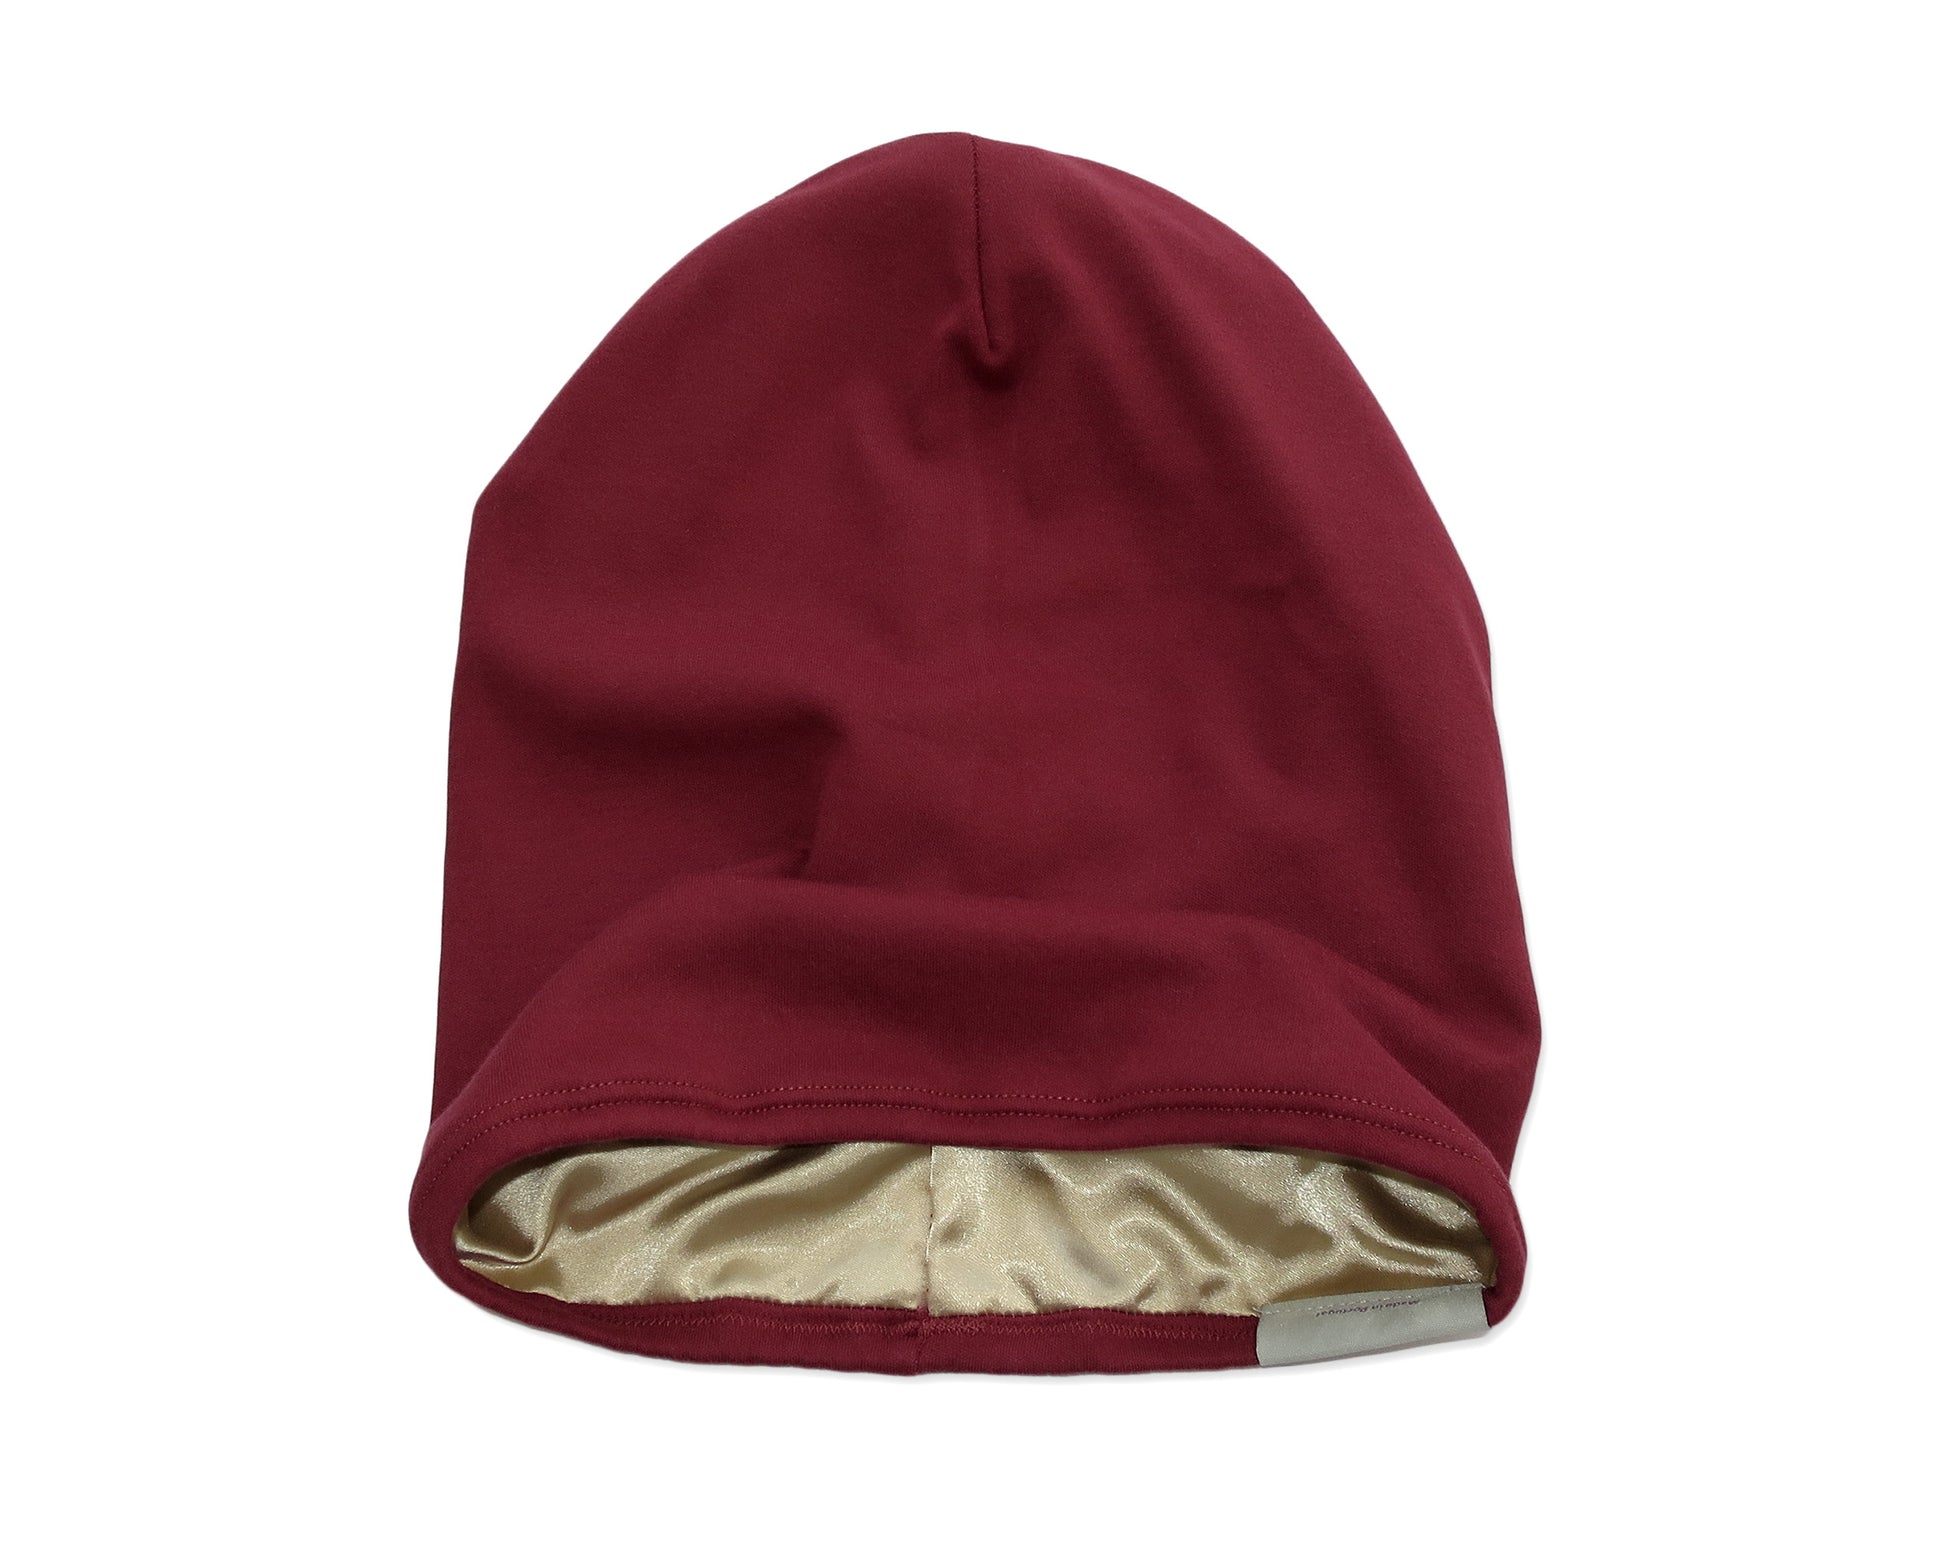 Red Satin-Lined Beanie for Women and Men - Soft and Warm Beanie with Satin Lining to Protect Hair